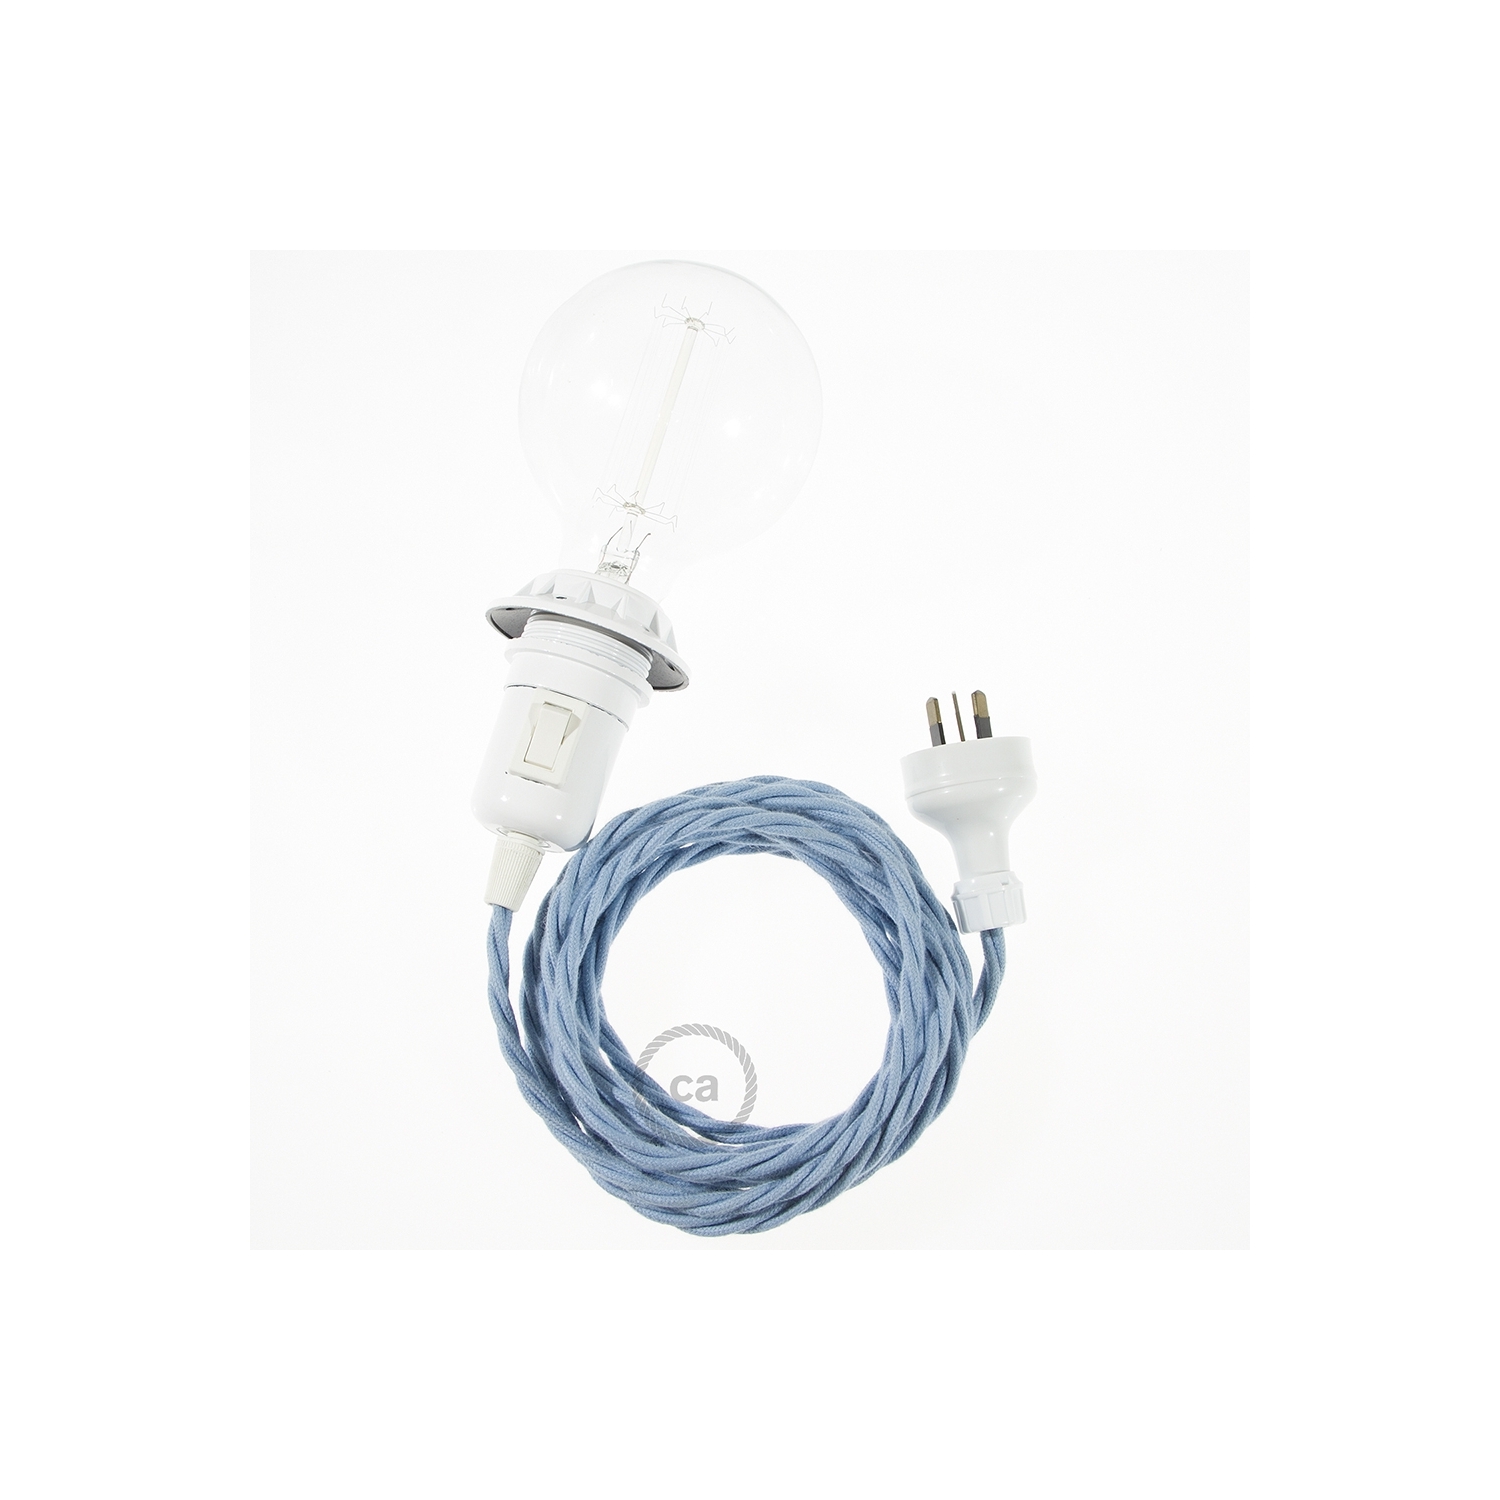 Create your TC53 Ocean Cotton Snake for lampshade and bring the light wherever you want.